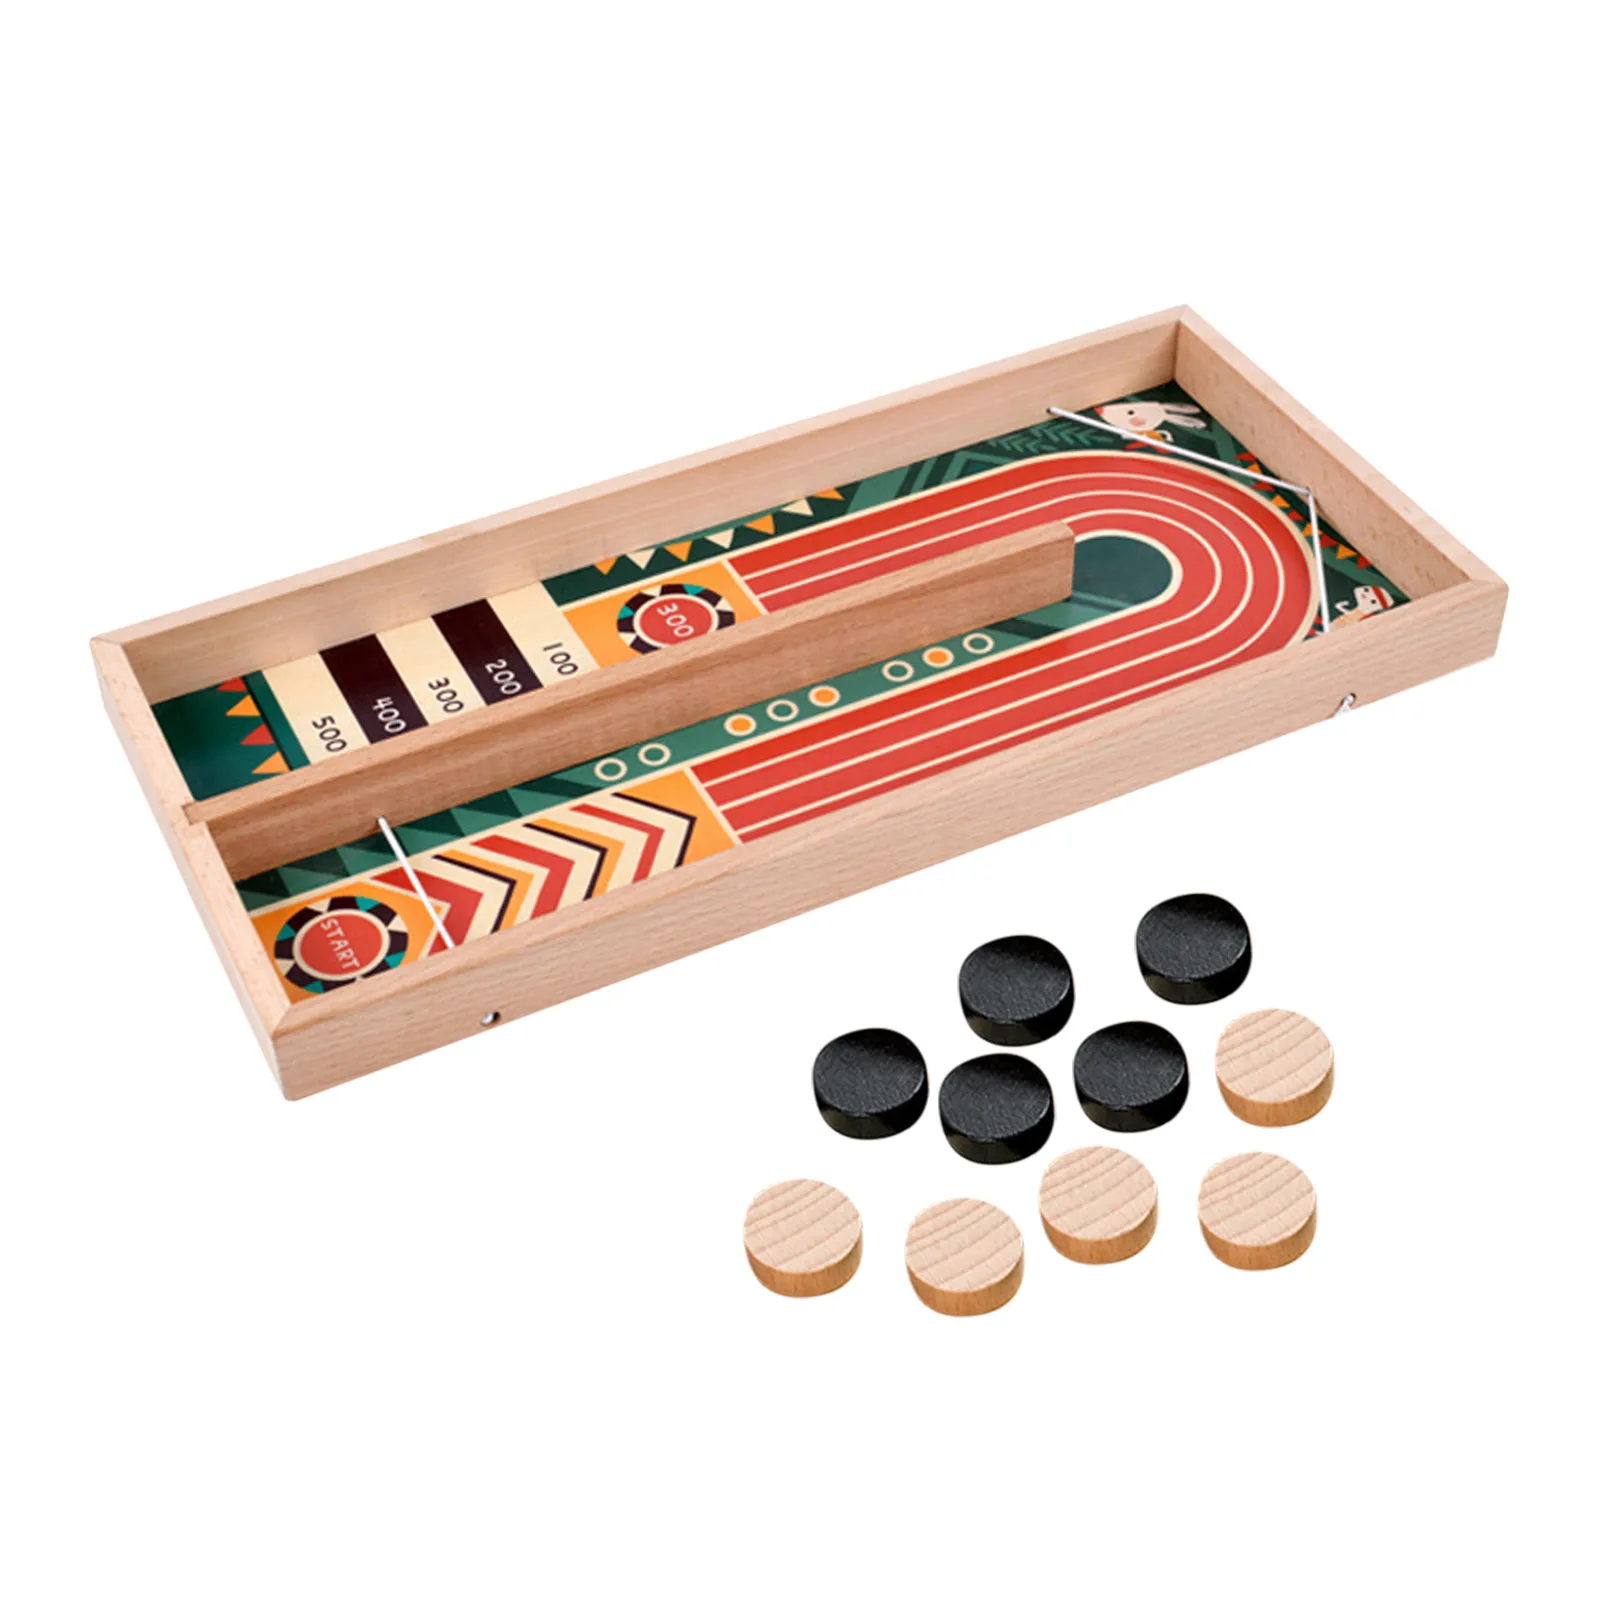 Table Hockey Paced Sling Puck Board Games Catapult Chess Sling Puck Winner Party Game Toy Set Children Wooden Toys